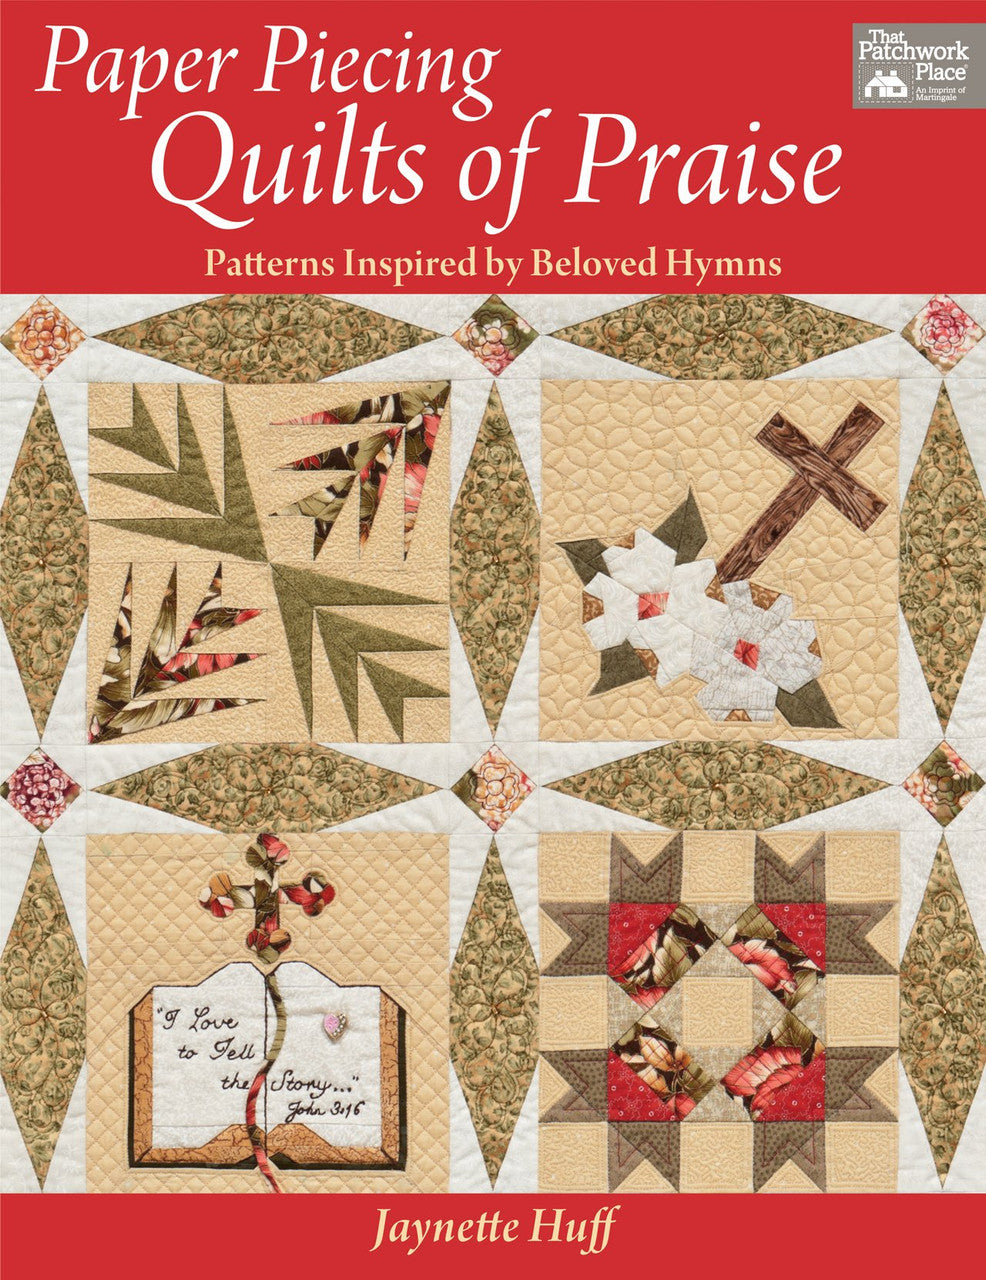 Paper Piecing Quilts of Praise Book by Jaynette Huff